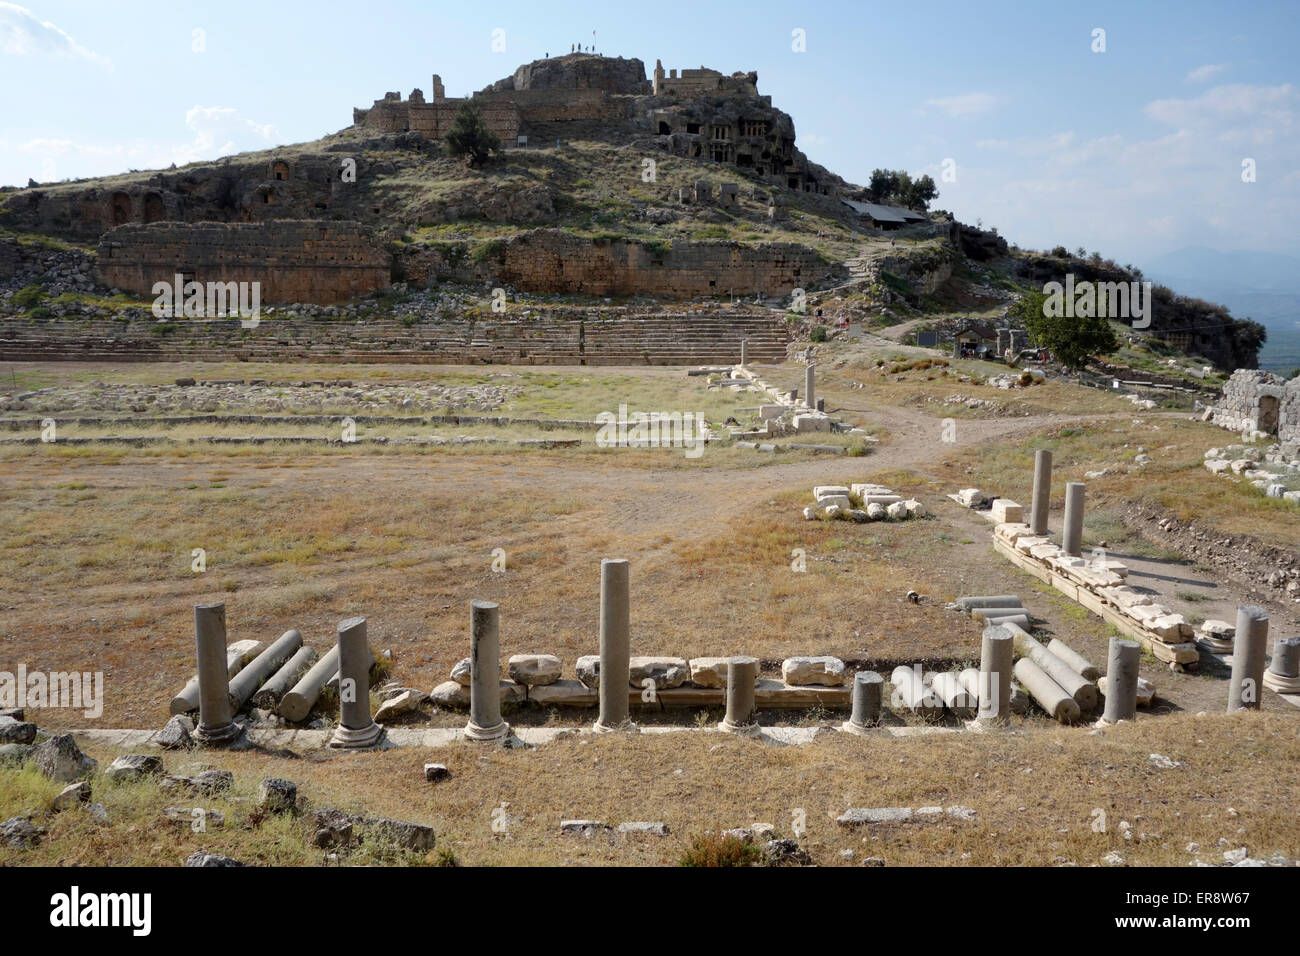 The remains of the Roman stadium and acropolis at the ancient city of Tlos, Turkey Stock Photo